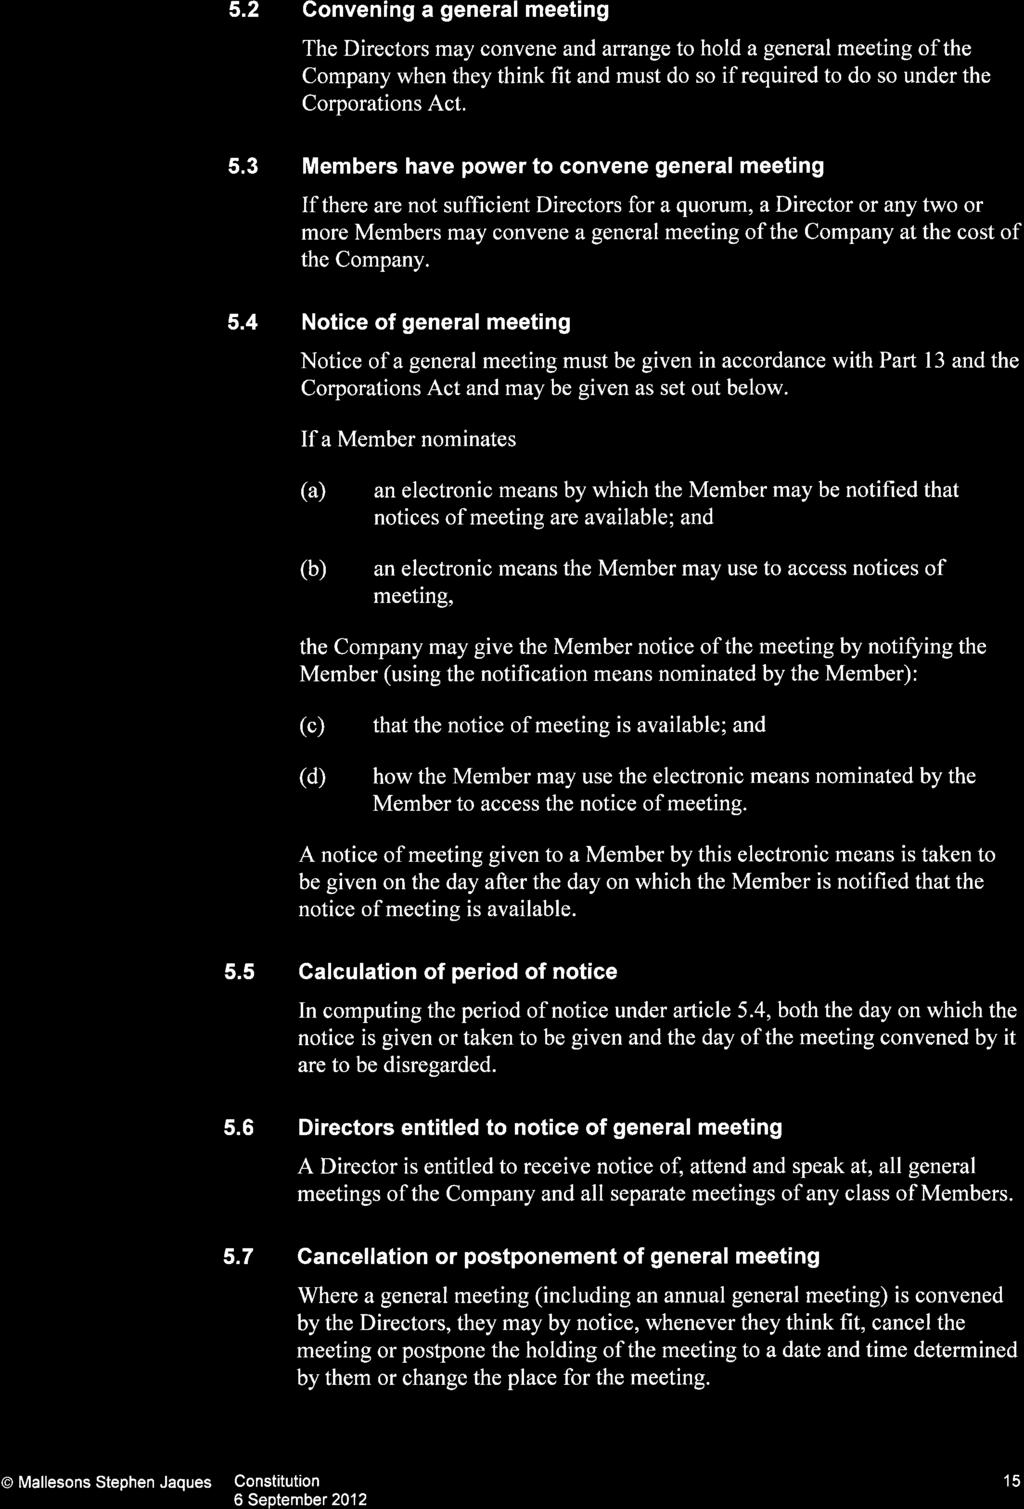 5.2 Convening a general meeting The Directors may convene and arrange to hold a general meeting of the Company when they think fit and must do so if required to do so under the Corporations Act. 5.